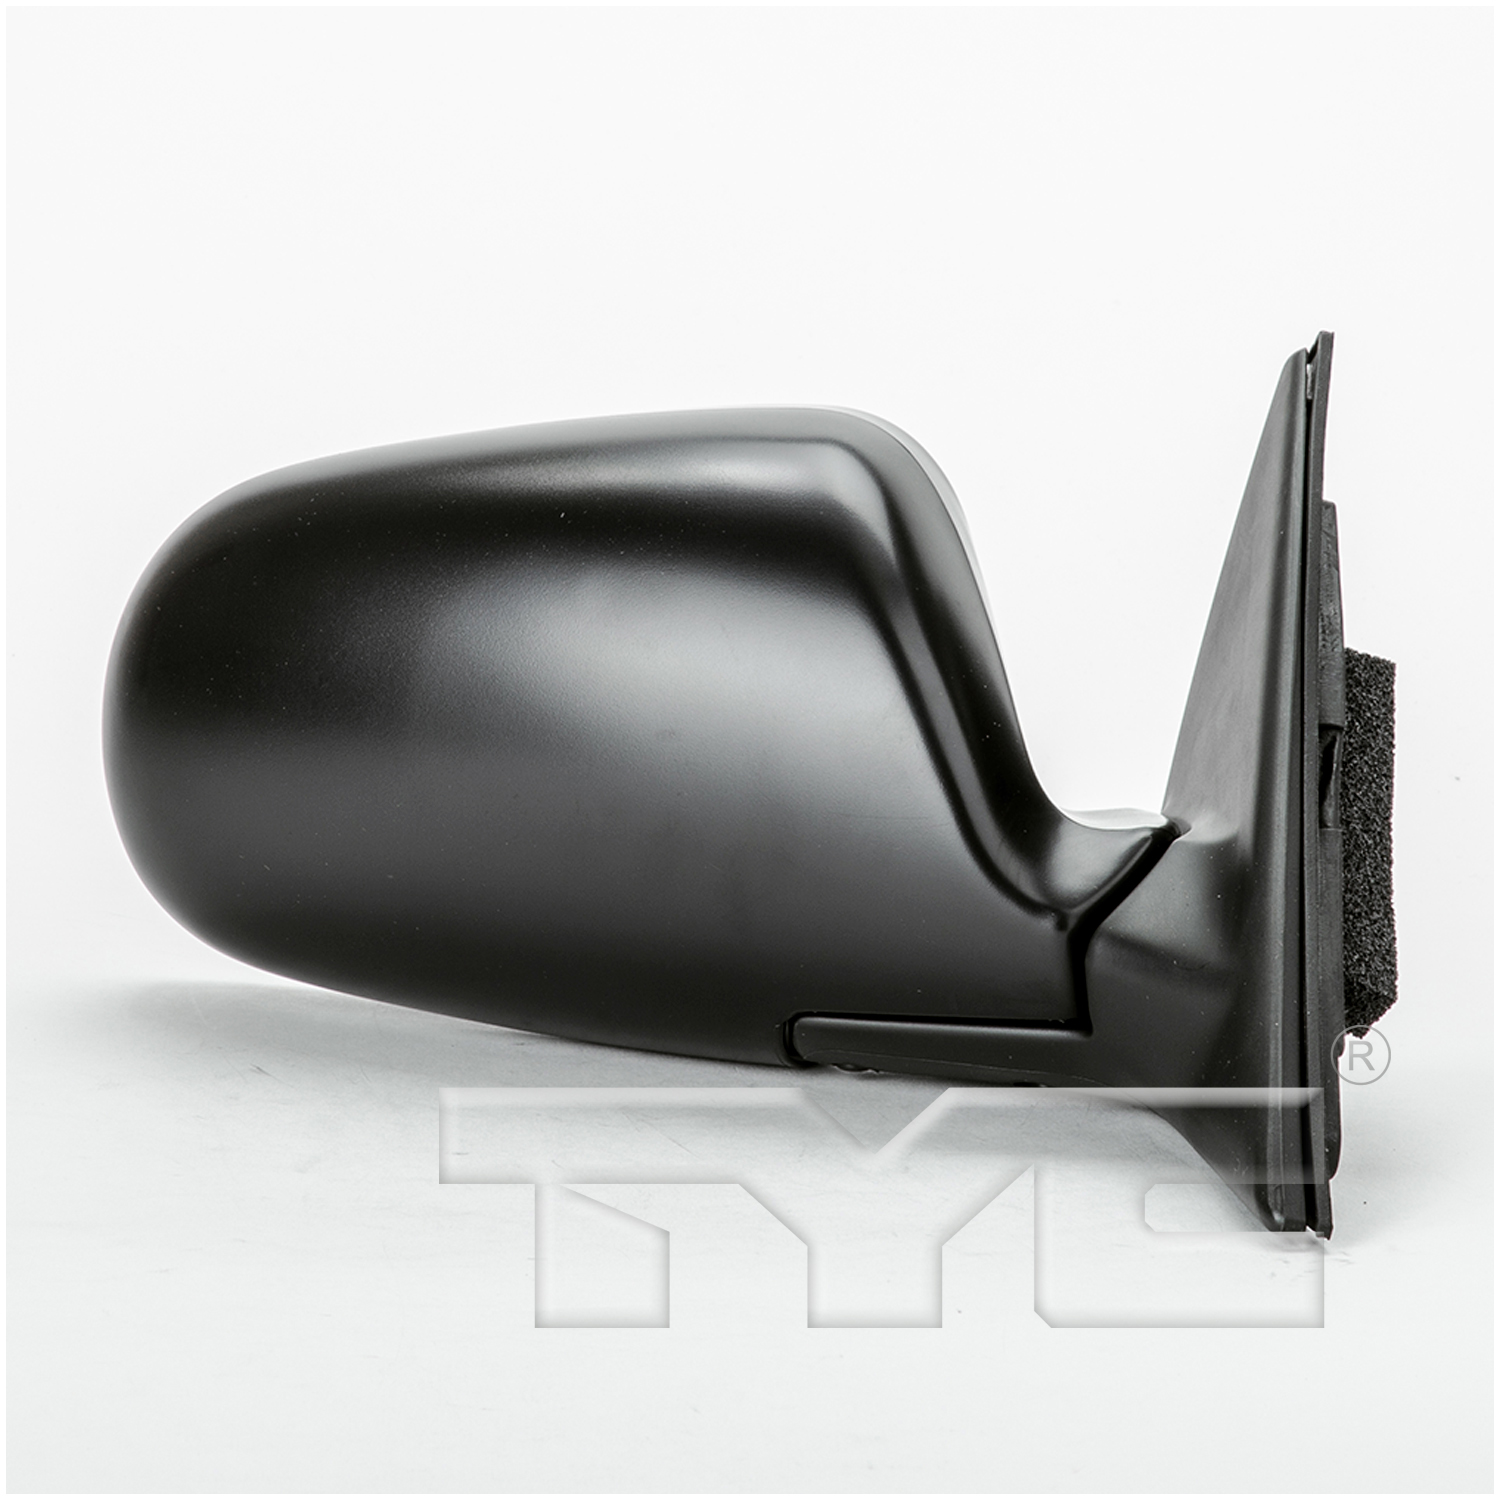 Aftermarket MIRRORS for HONDA - ACCORD, ACCORD,90-93,RT Mirror outside rear view